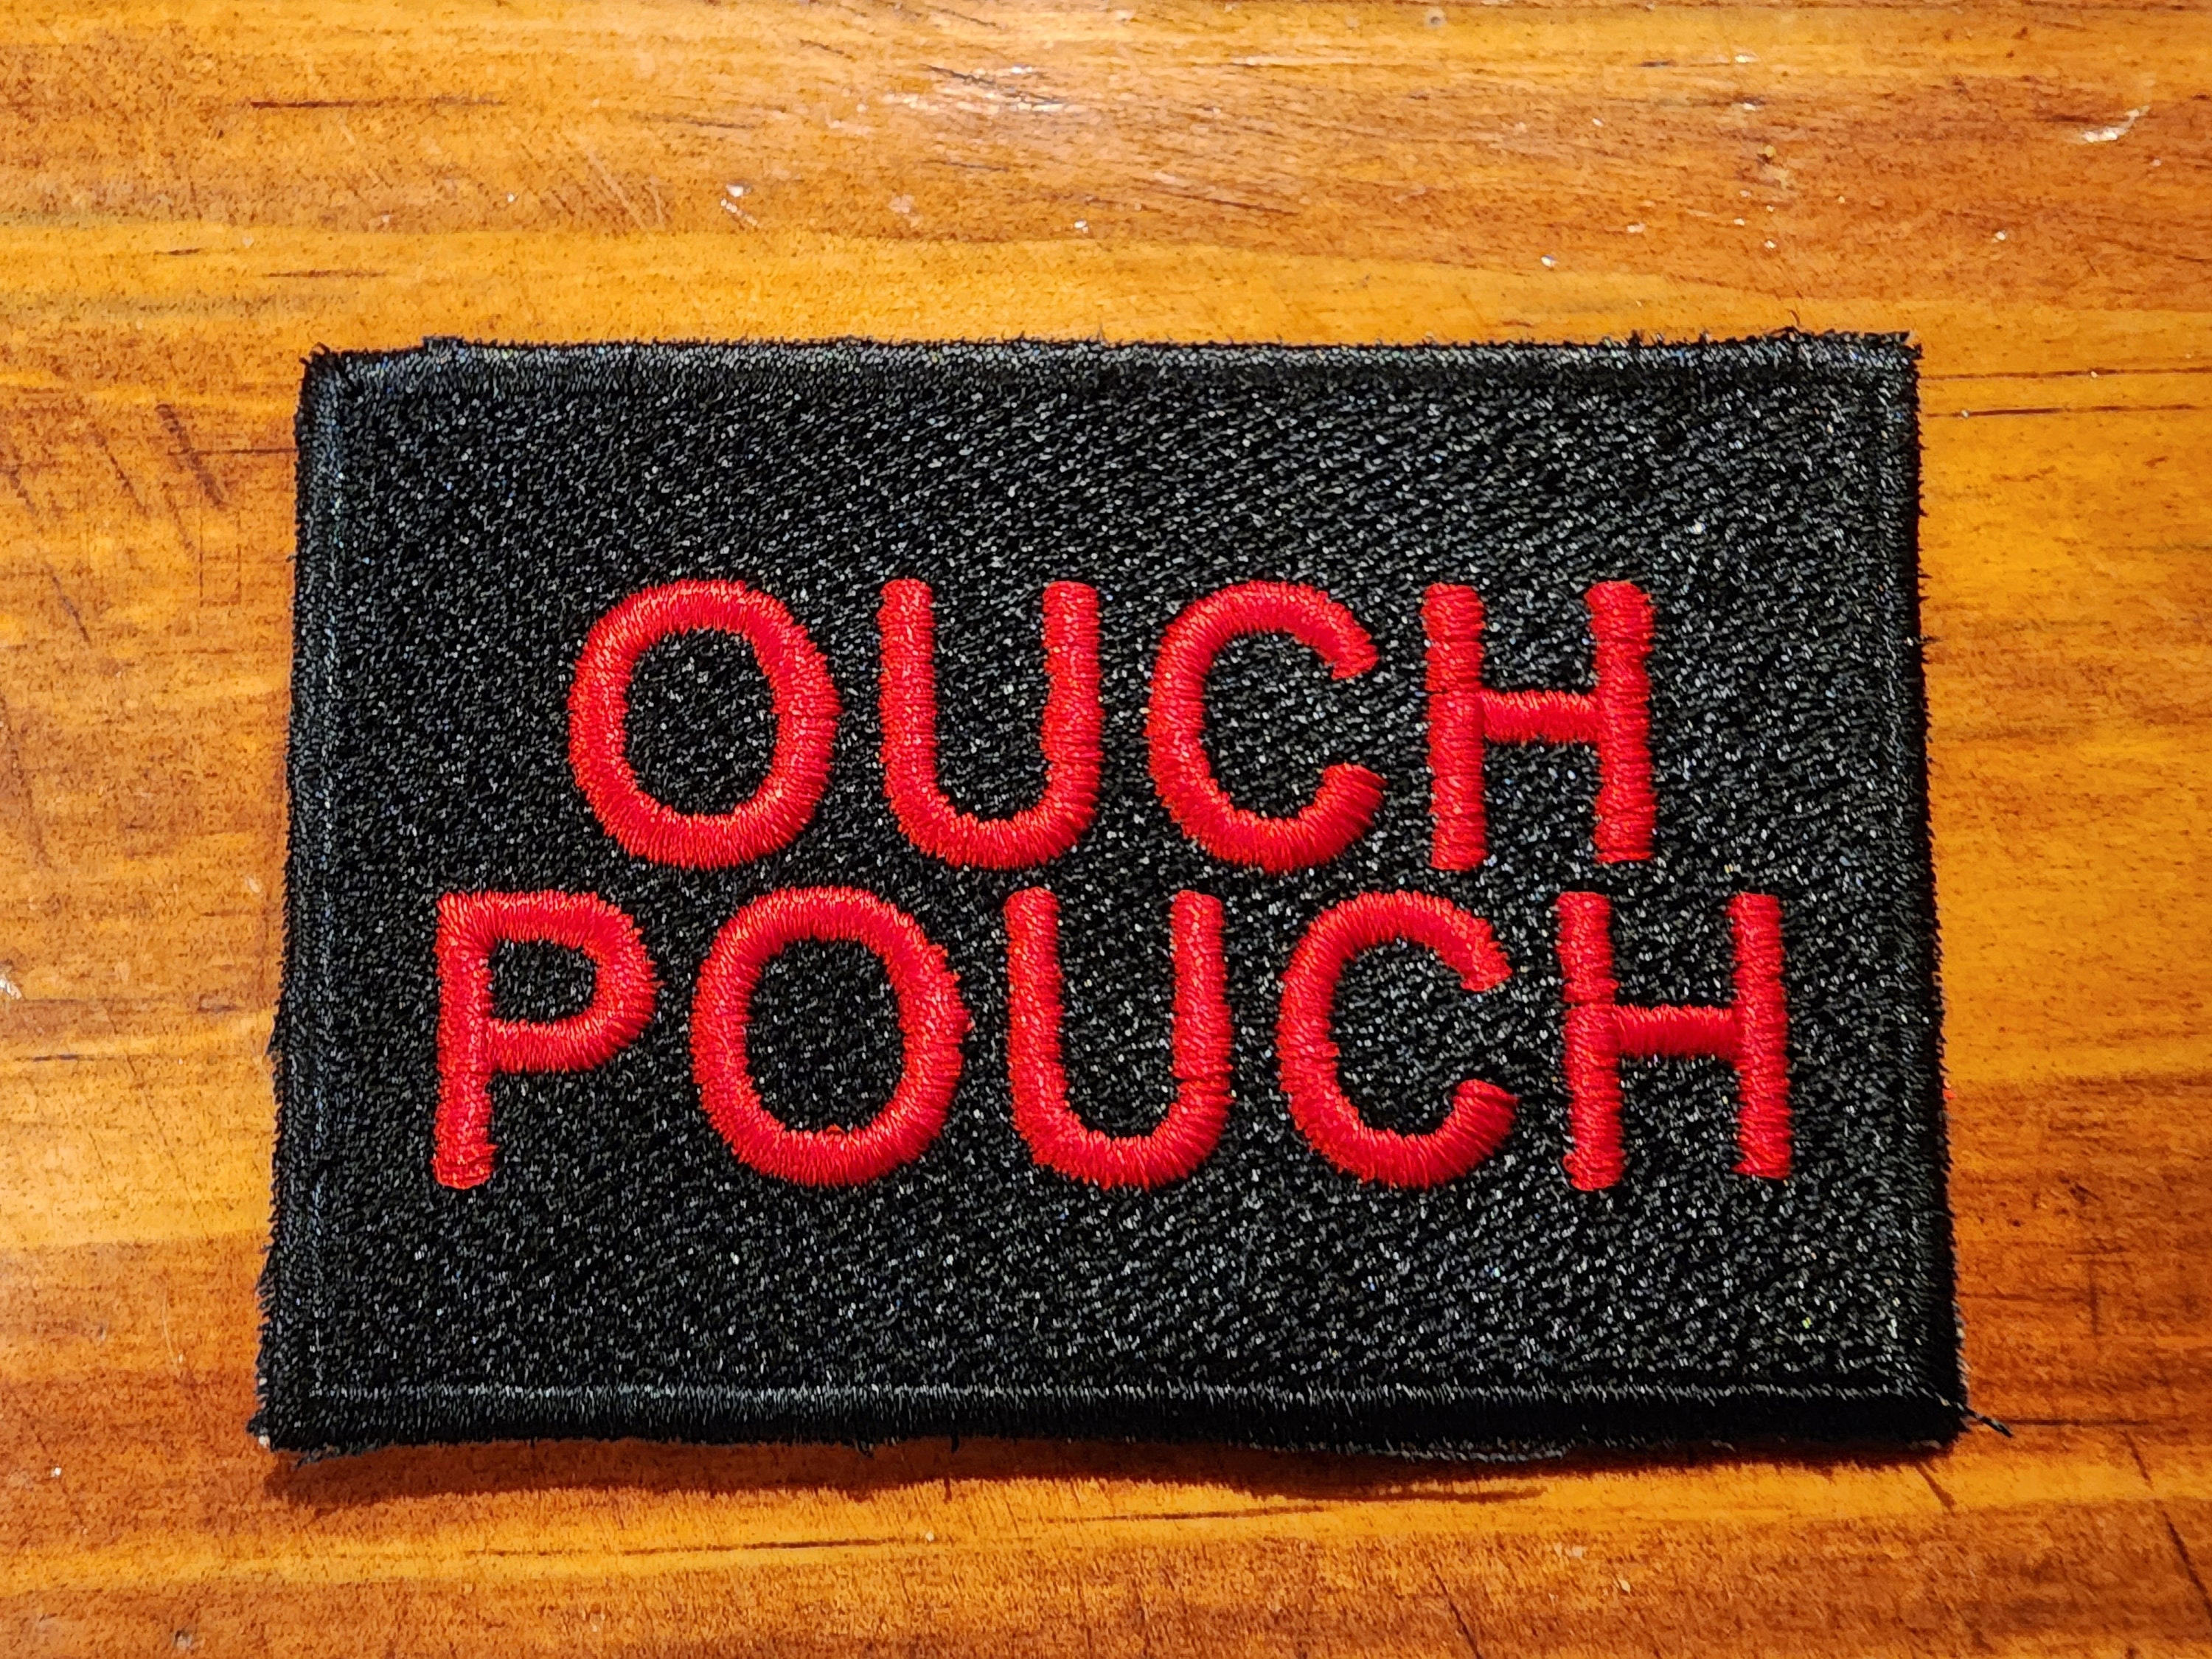 Ouch Pouch velcro Patch Military Patch Bag Patch Tactical -  Canada